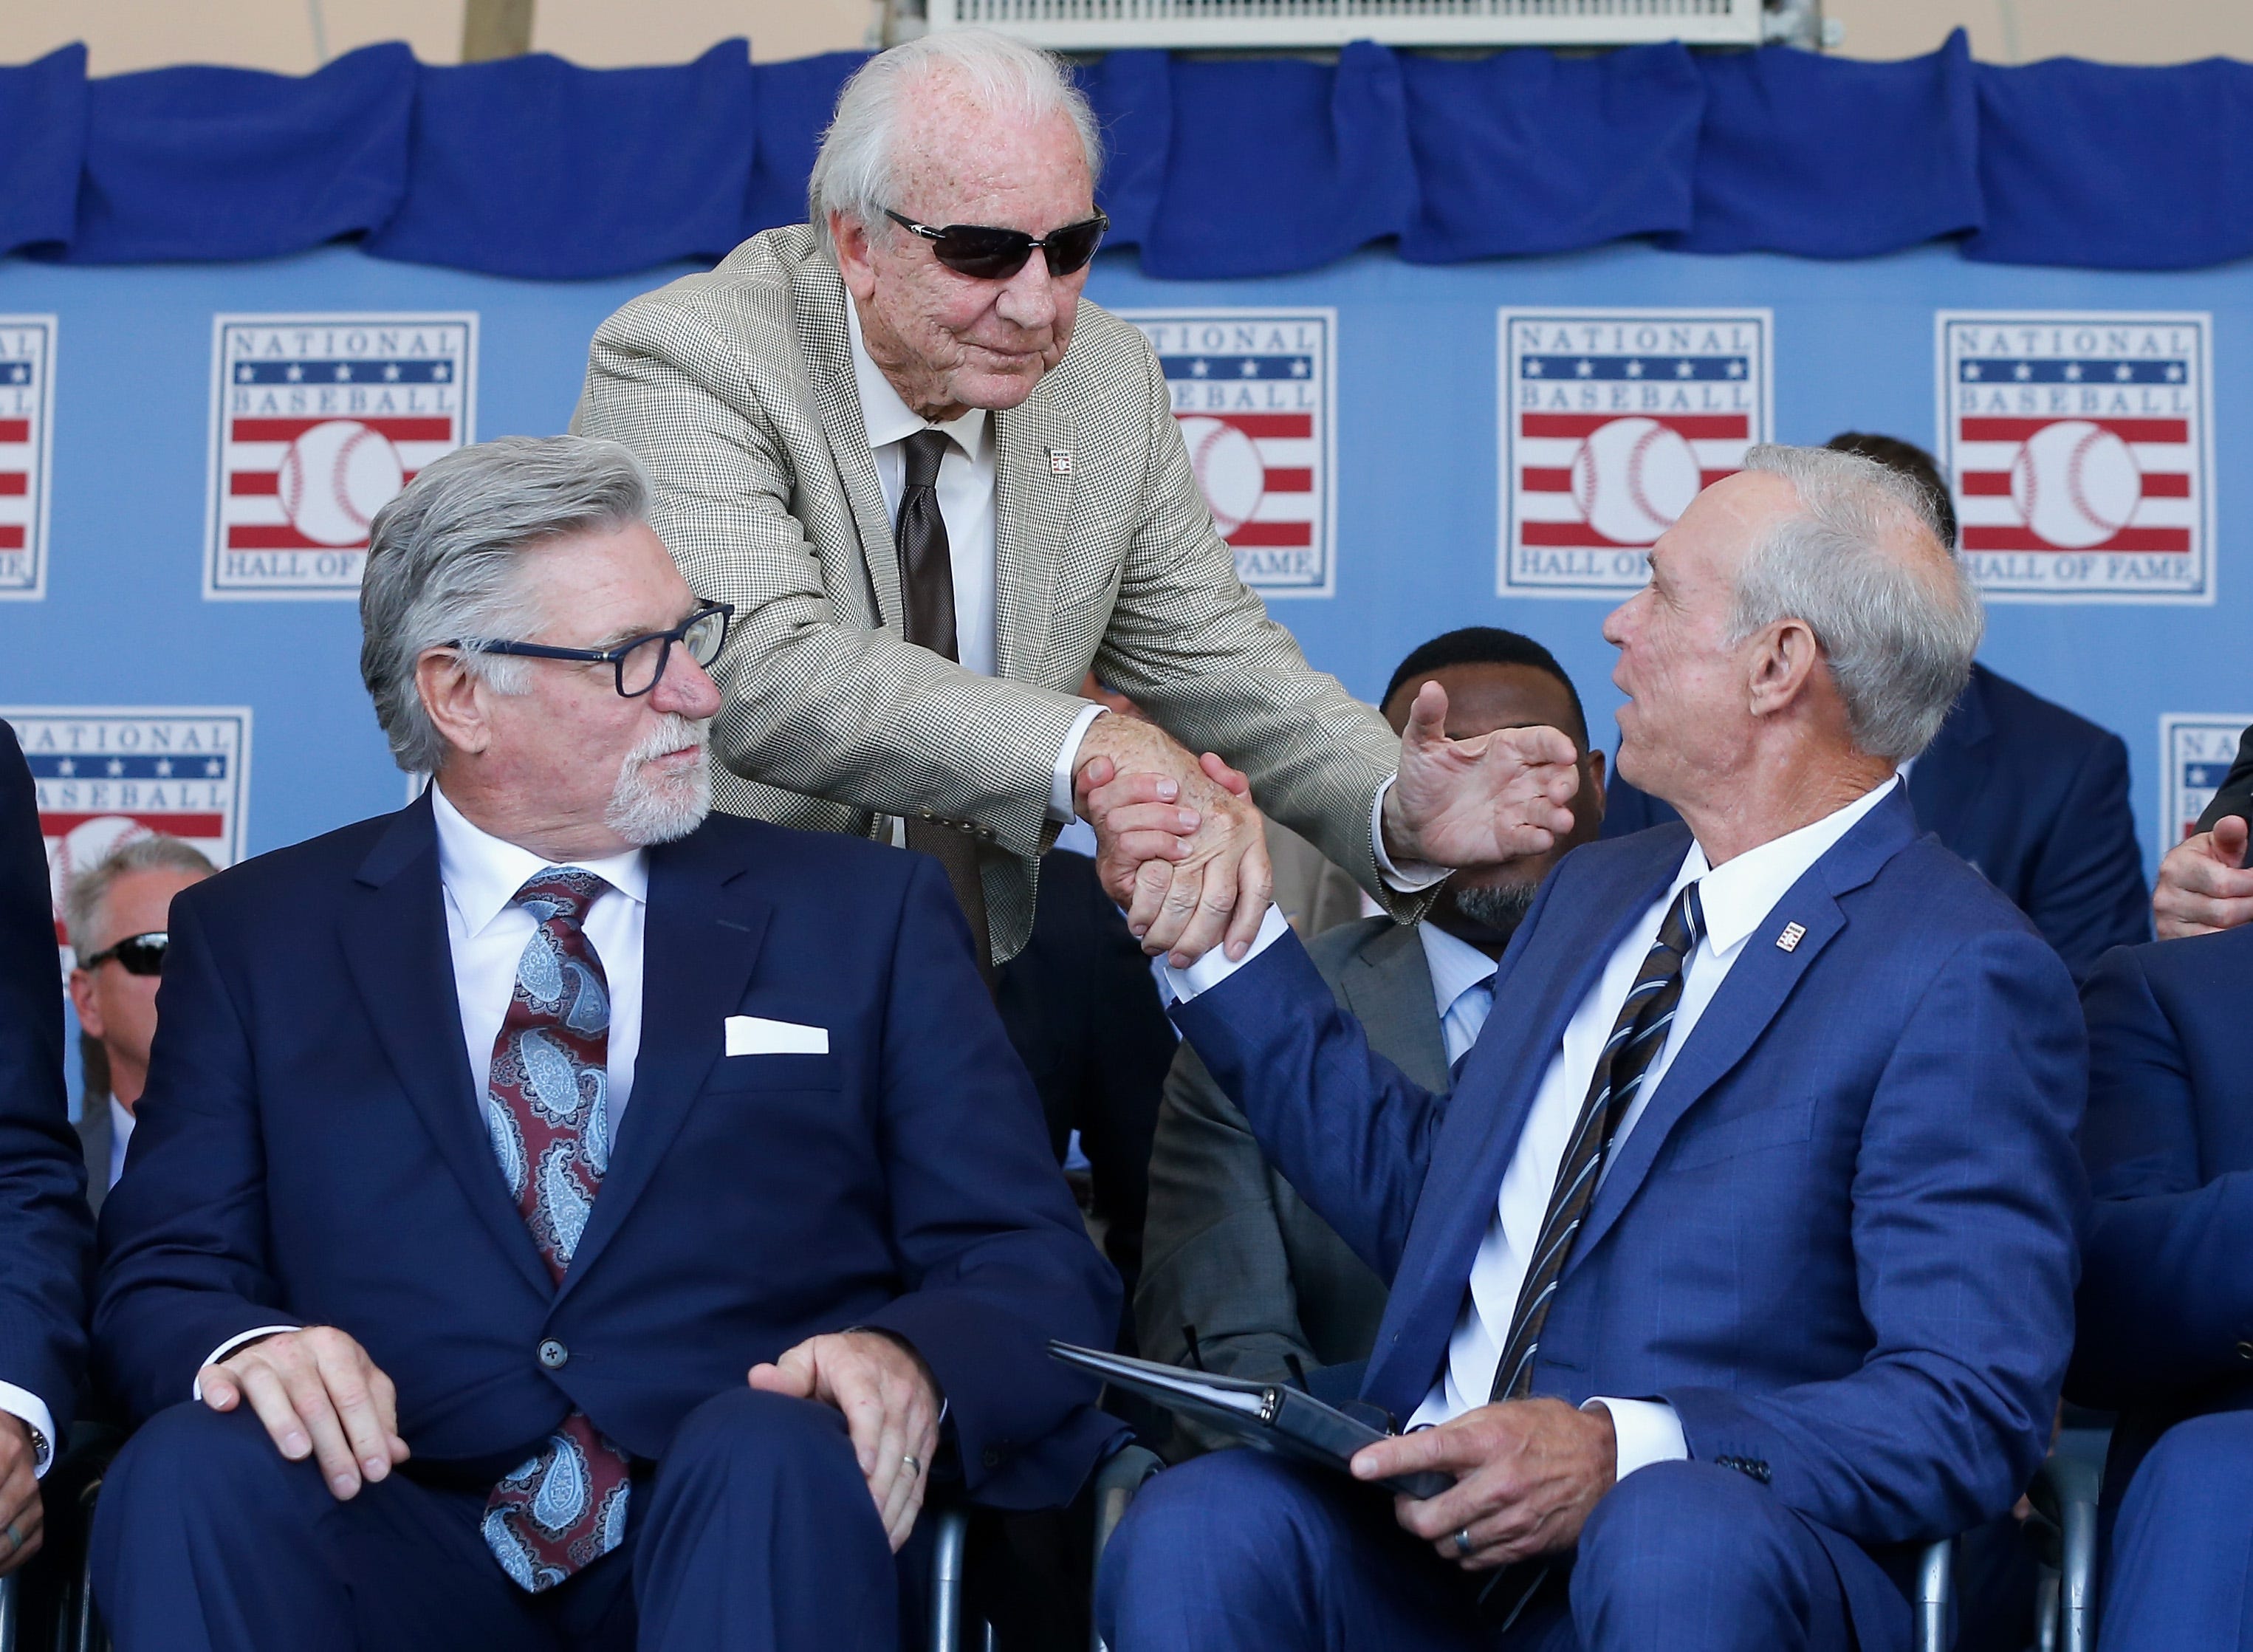 Hall of Famer Al Kaline congratulates inductee Alan Trammell after his speech as fellow inductee Jack Morris looks on at Clark Sports Center during the Baseball Hall of Fame induction ceremony on July 29, 2018 in Cooperstown, New York.